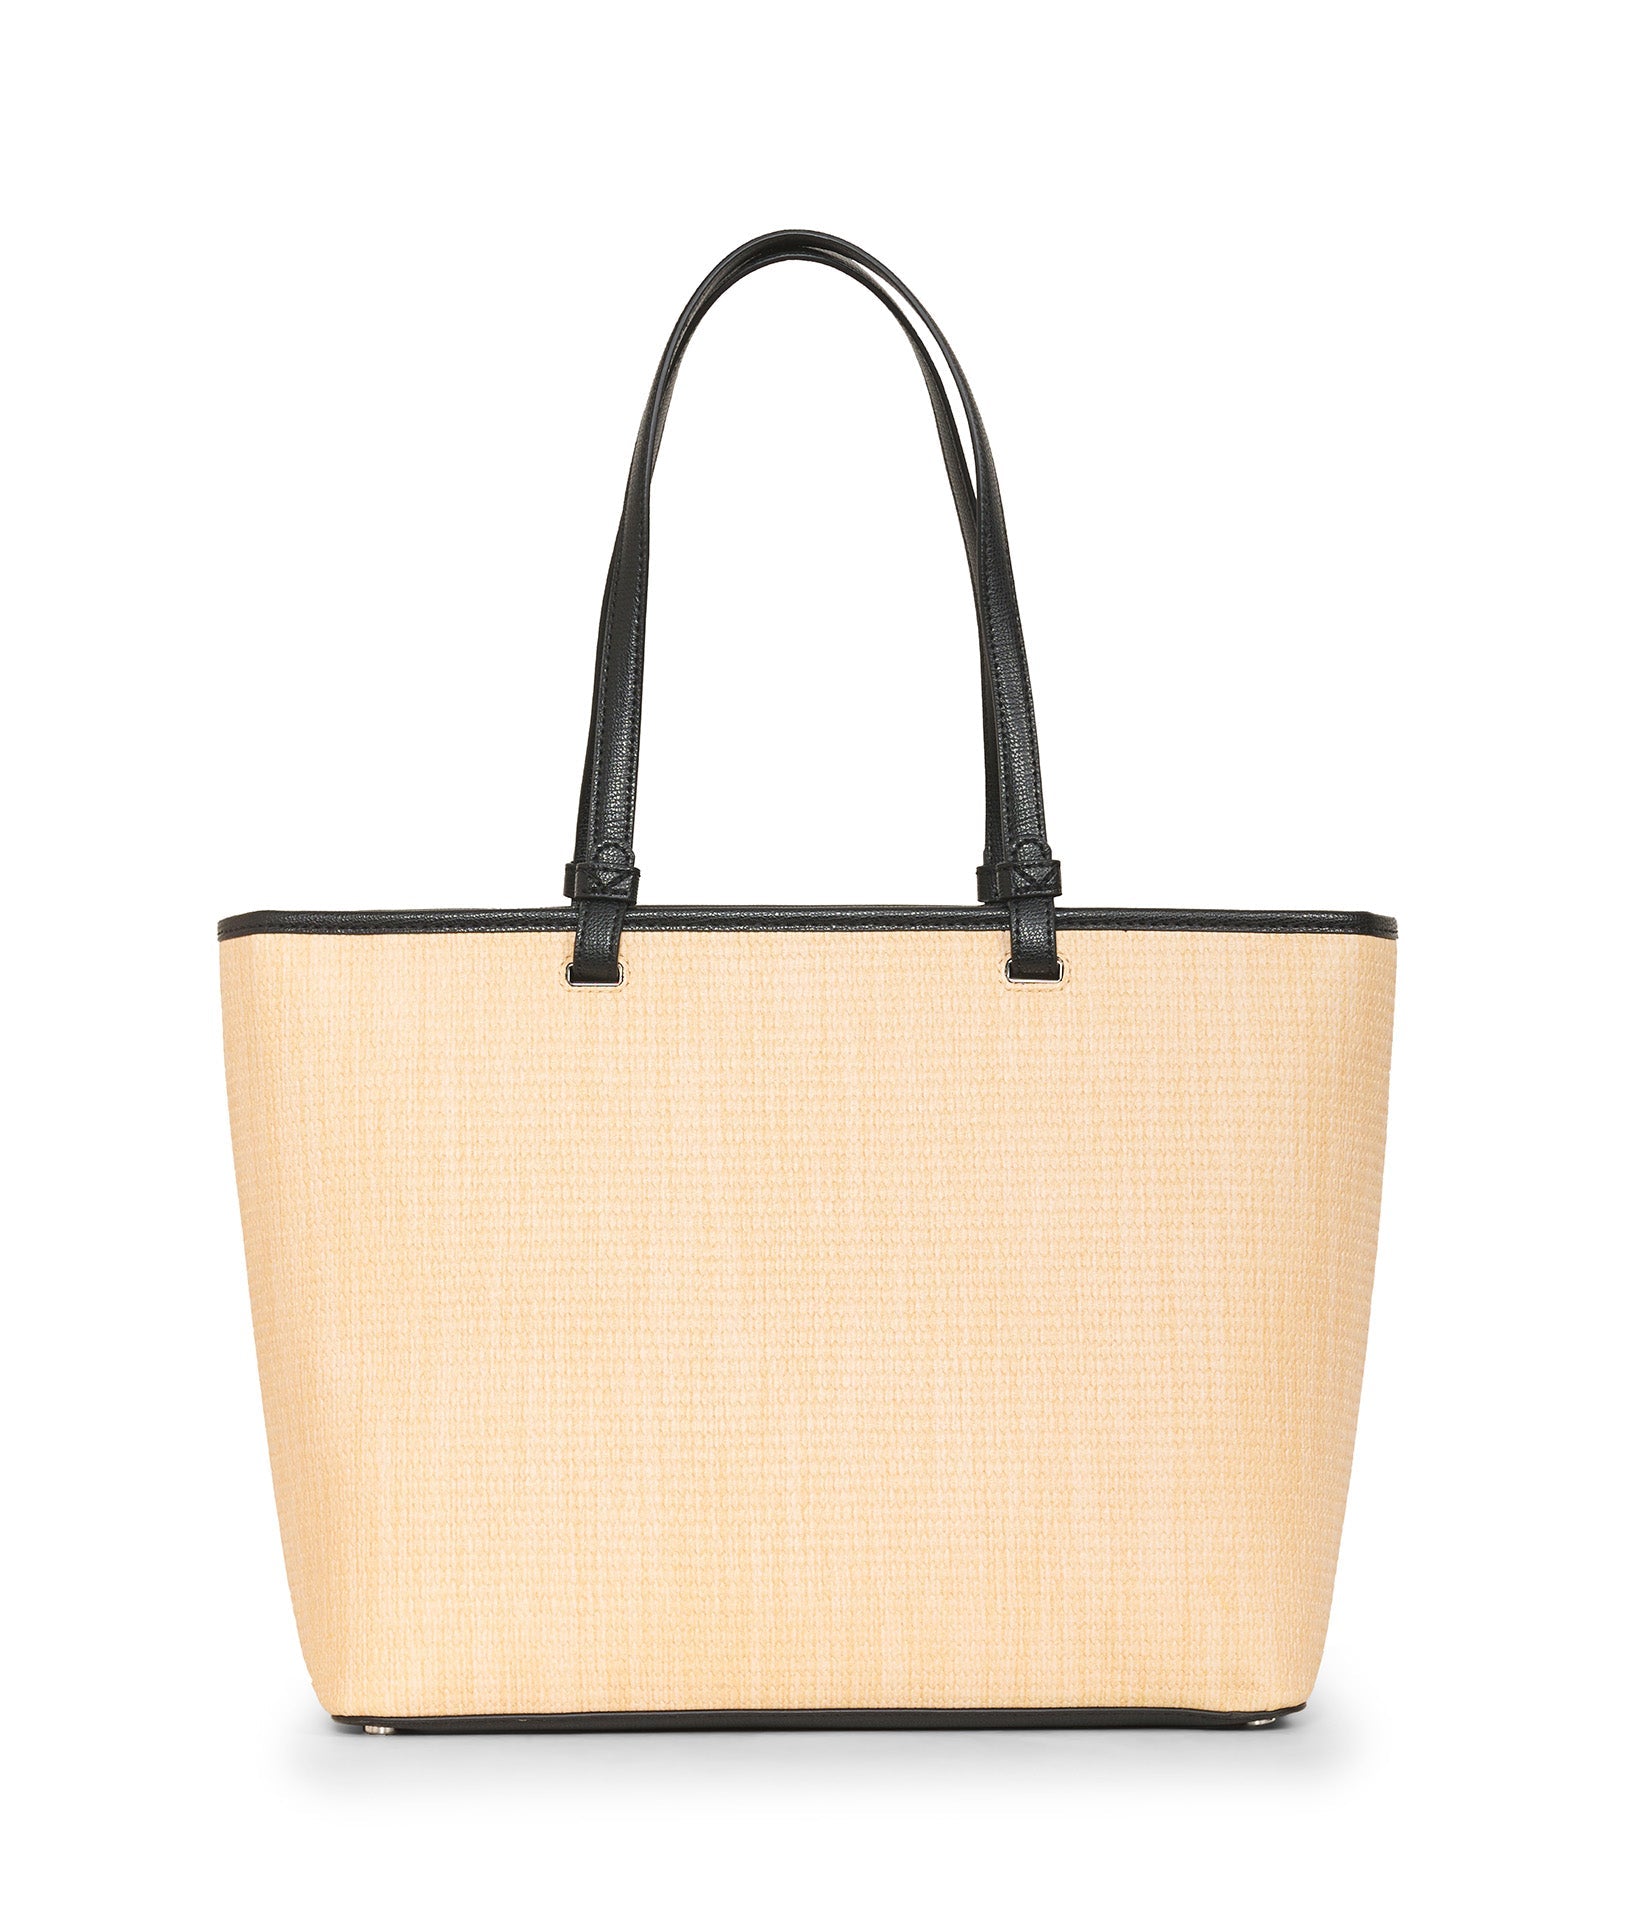 MAYBELLE LOGO TOTE